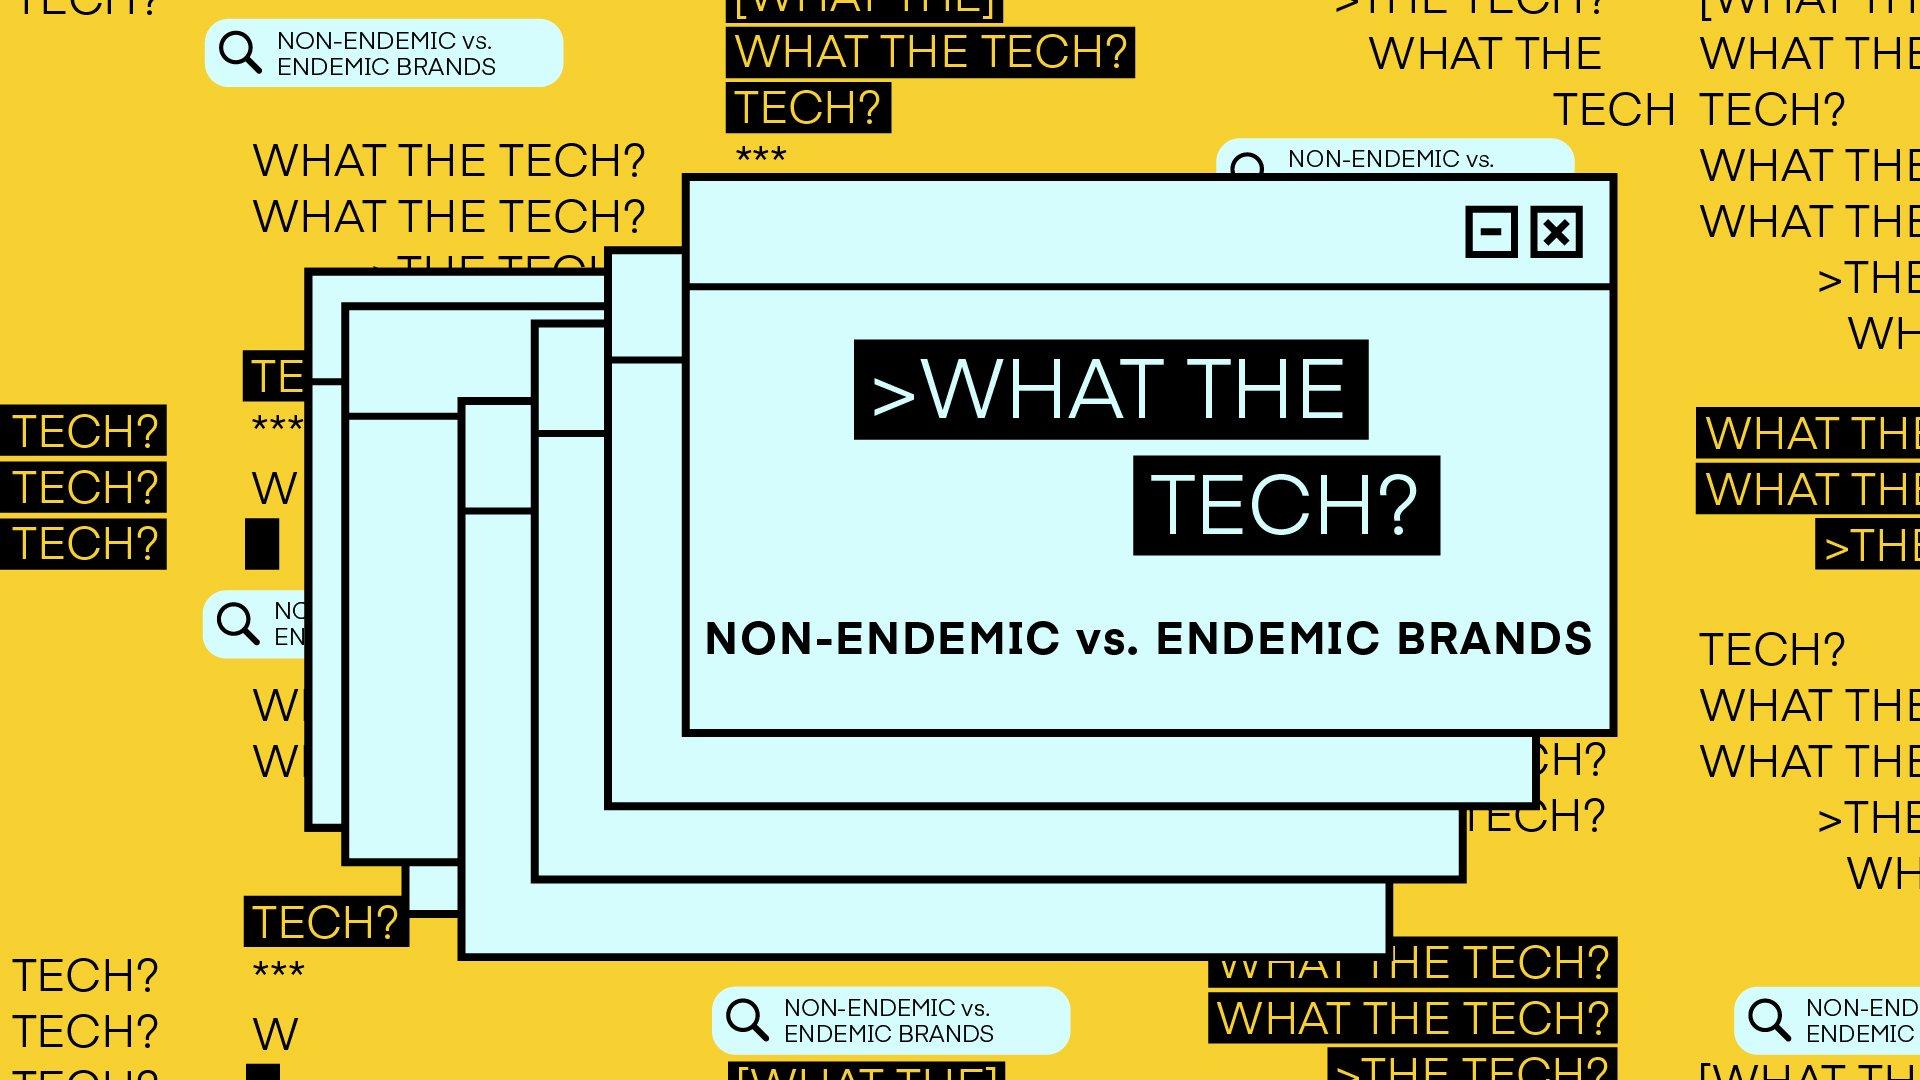 What the Tech are Non-endemic vs. Endemic Brands?